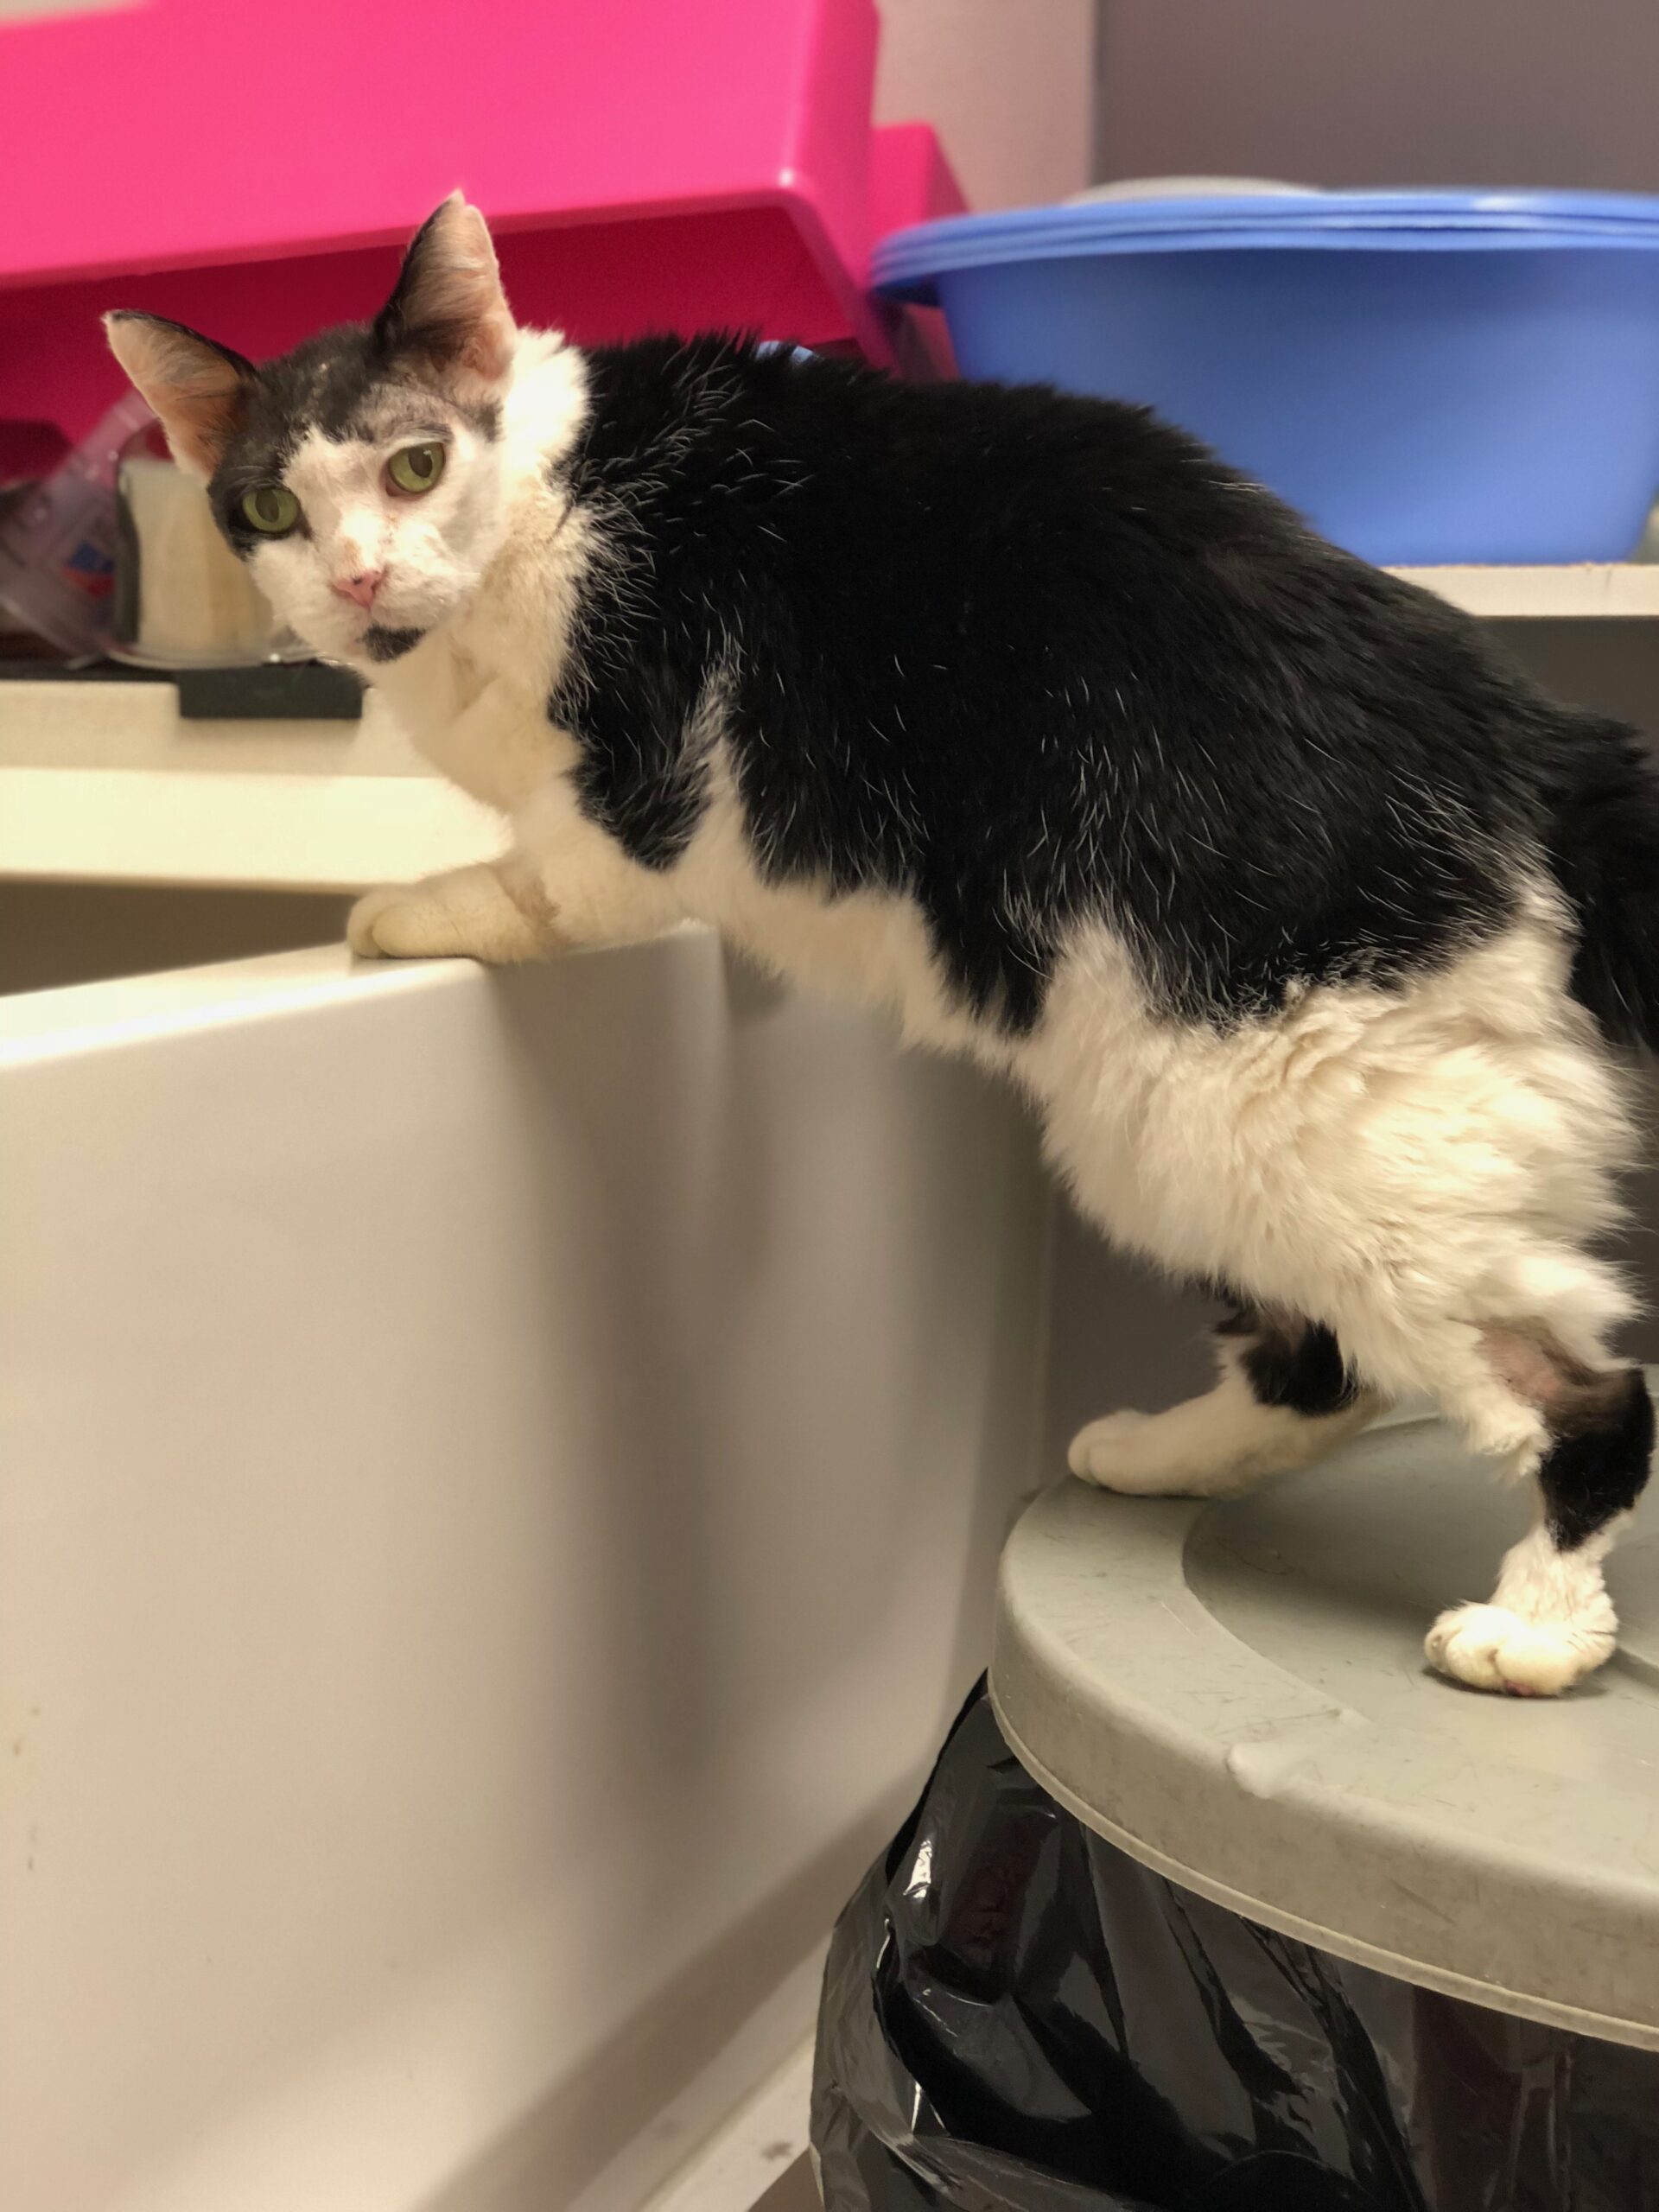 A black and white cat goes exploring in a veterinary office